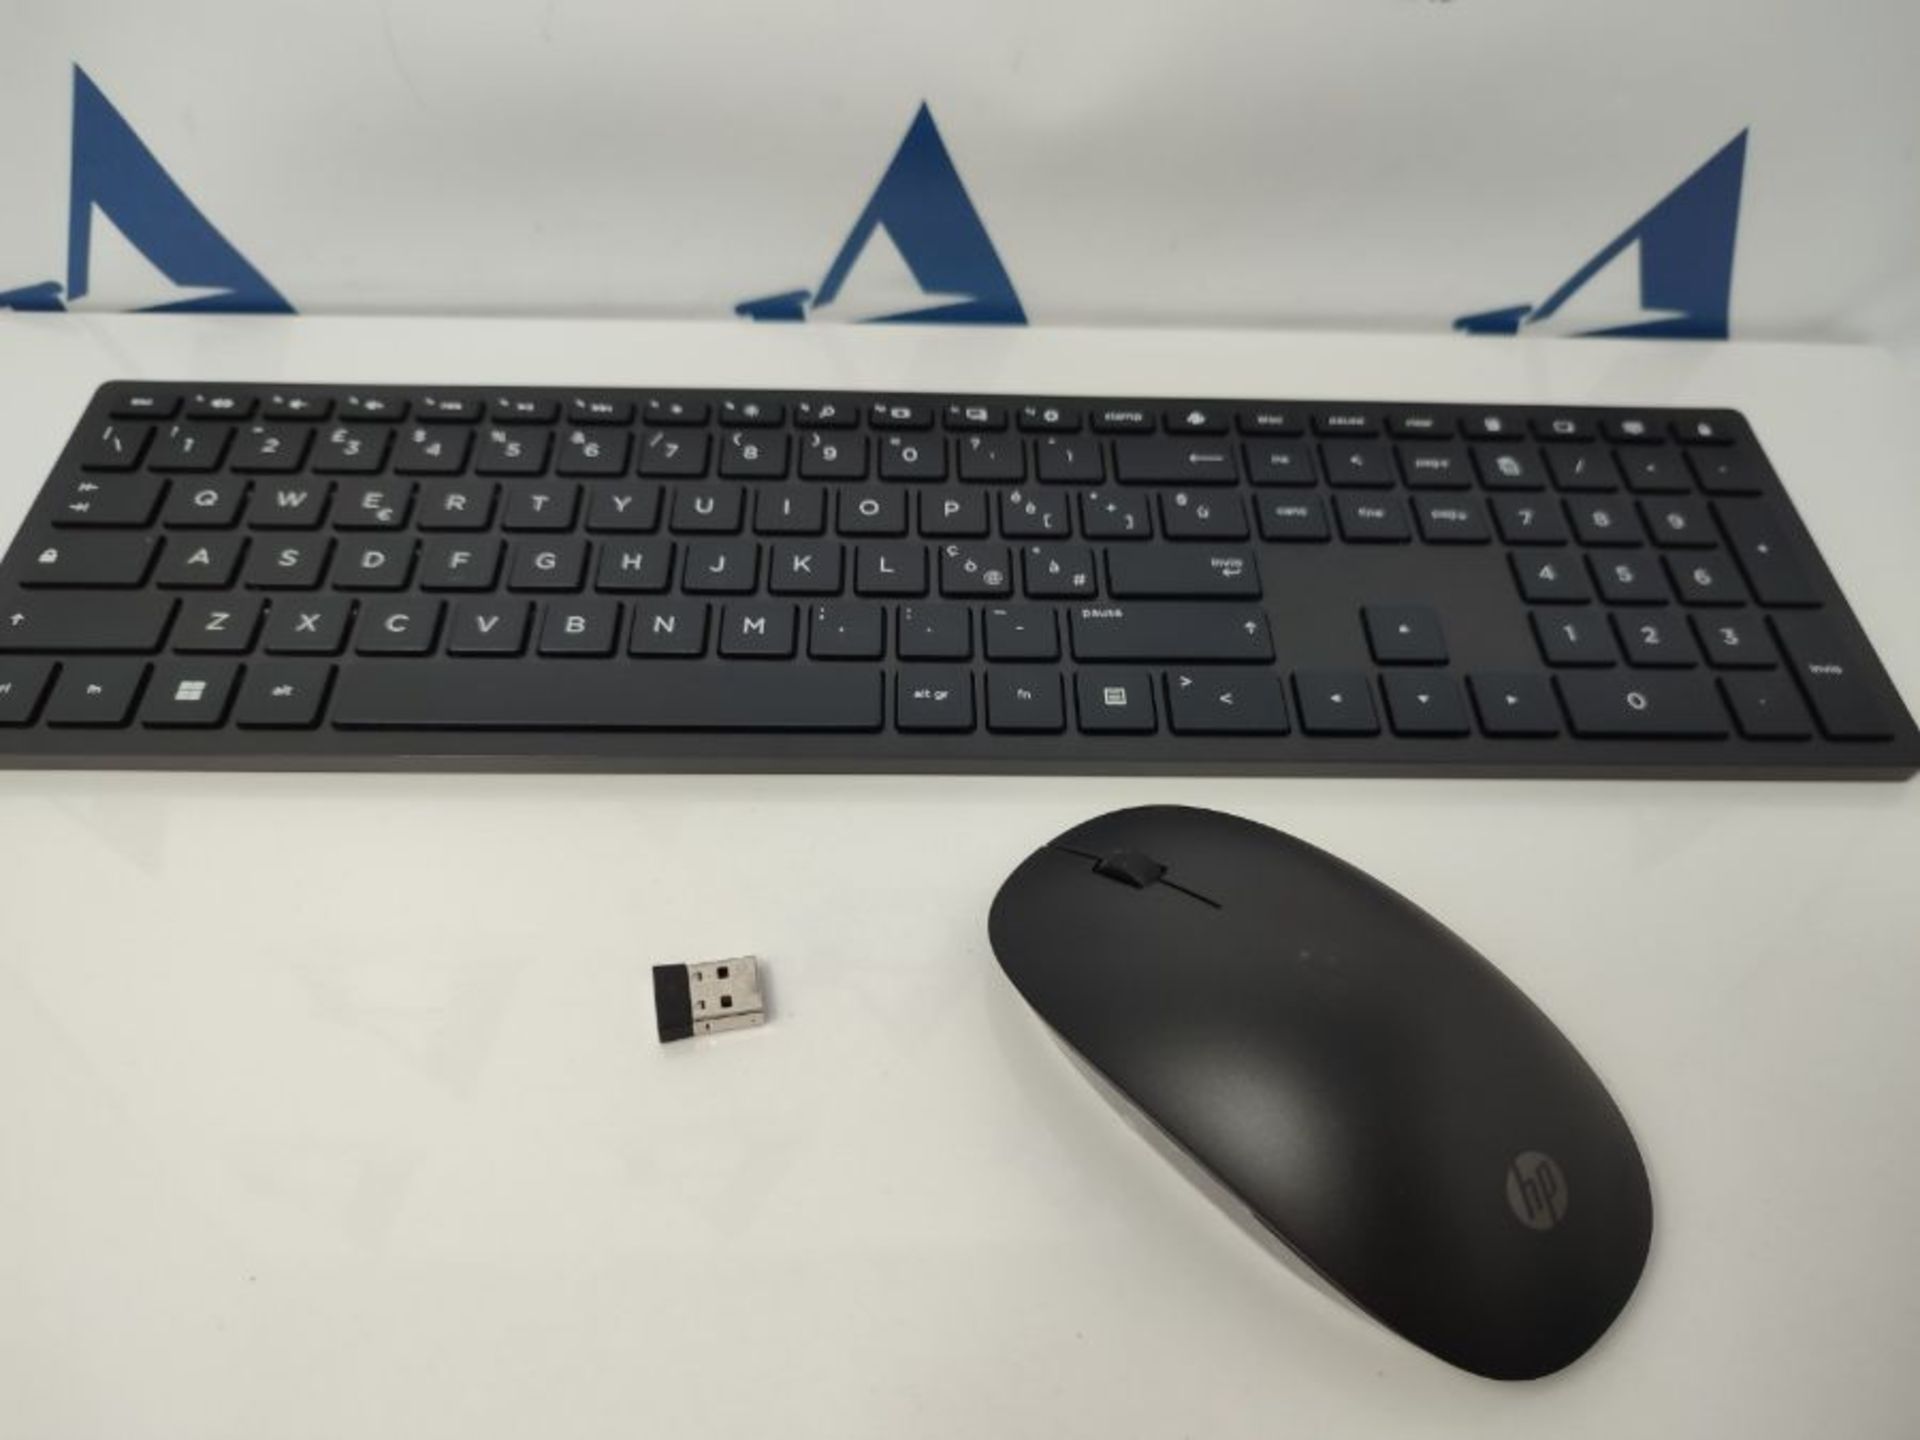 RRP £50.00 HP Pavilion 800 Wireless QWERTZ Keyboard and Mouse Combo (Nano USB Receiver, 2 AAA Bat - Image 3 of 3